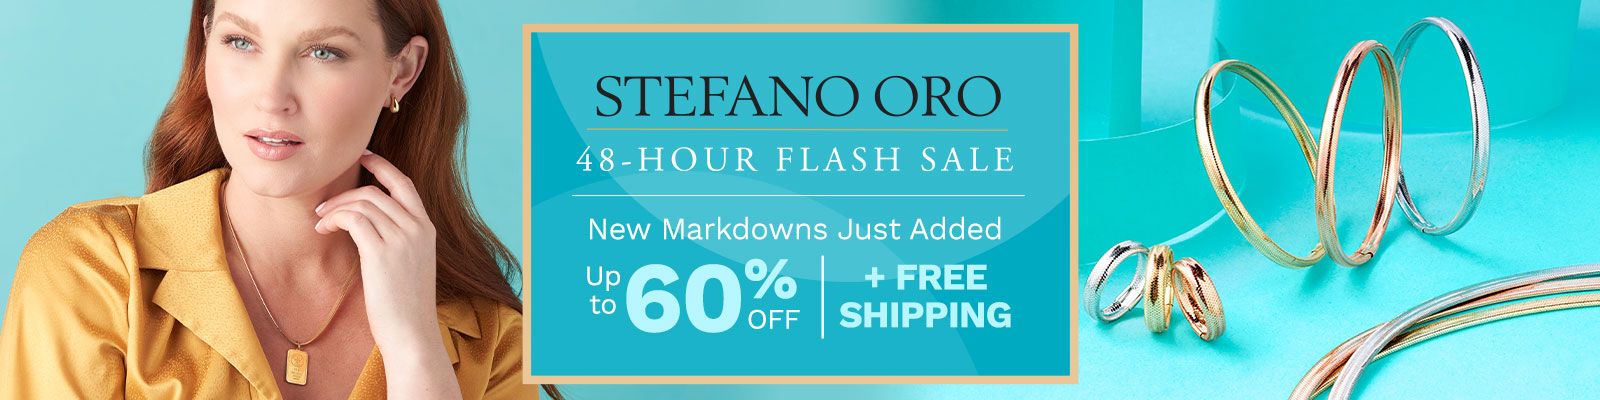 Stefano Oro | 48-HOUR FLASH SALE New Markdowns Just Added | 203-711, 211-447, 211-444, 211-436